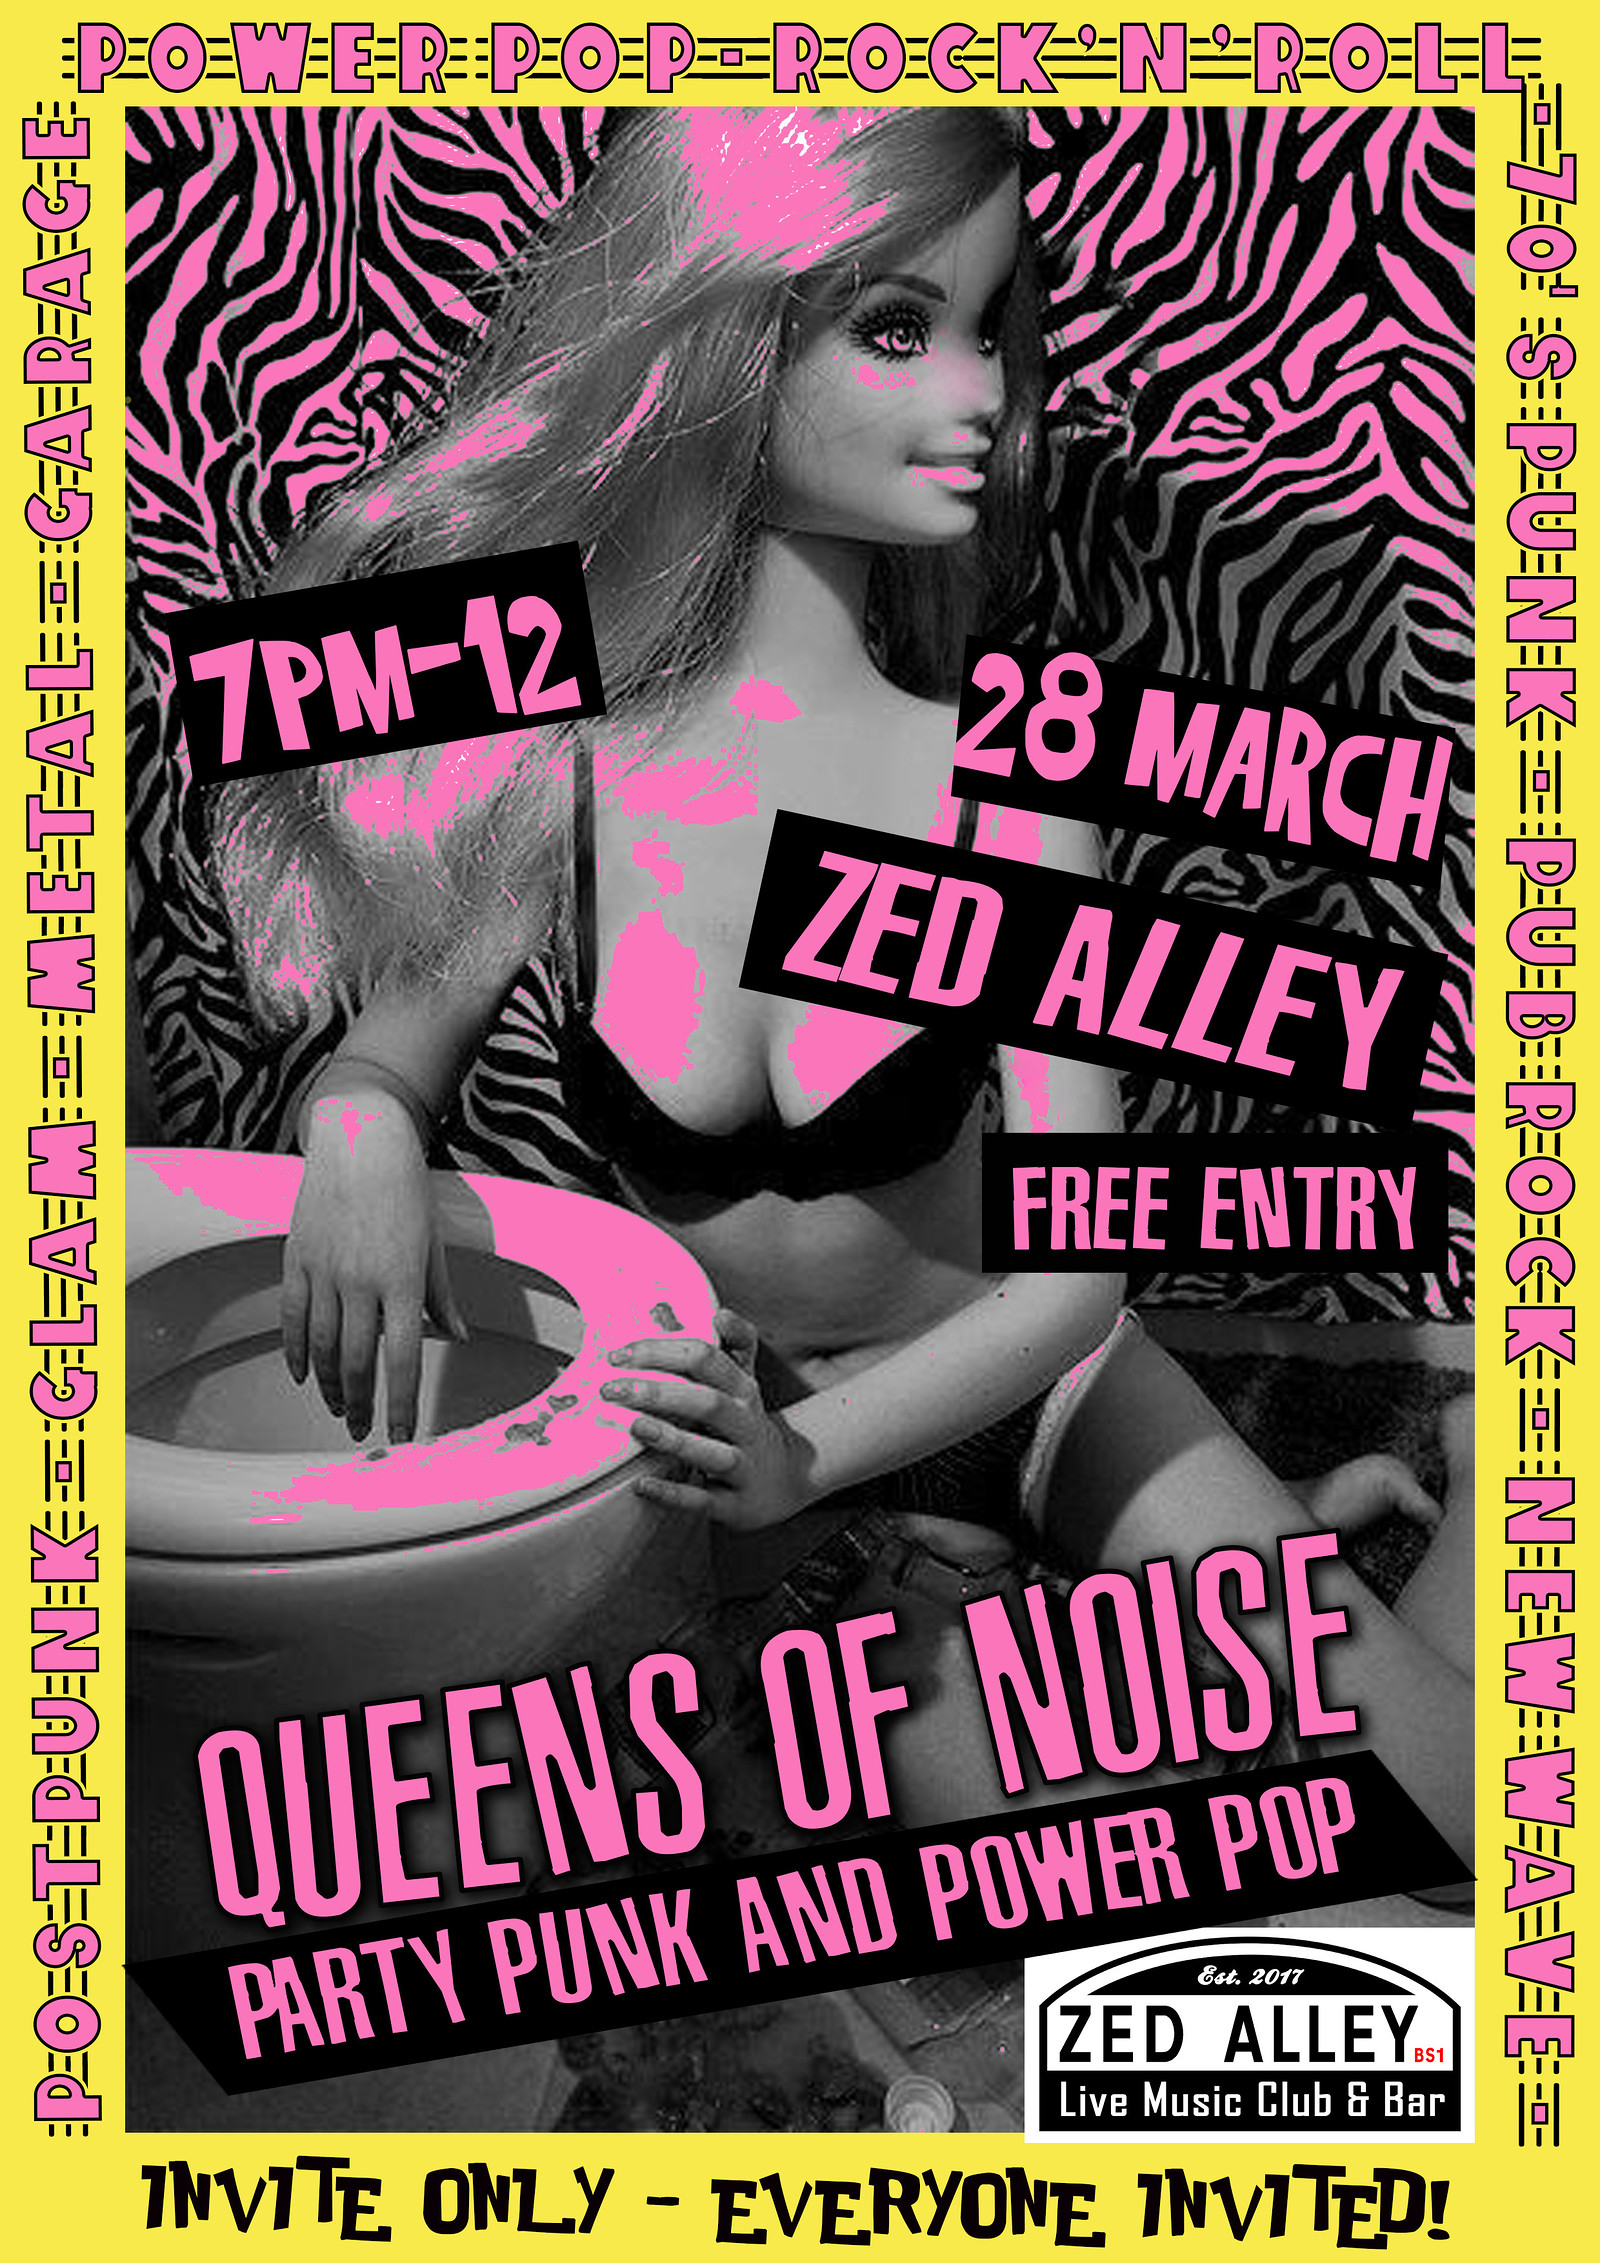 Queens of Noise at Zed Alley